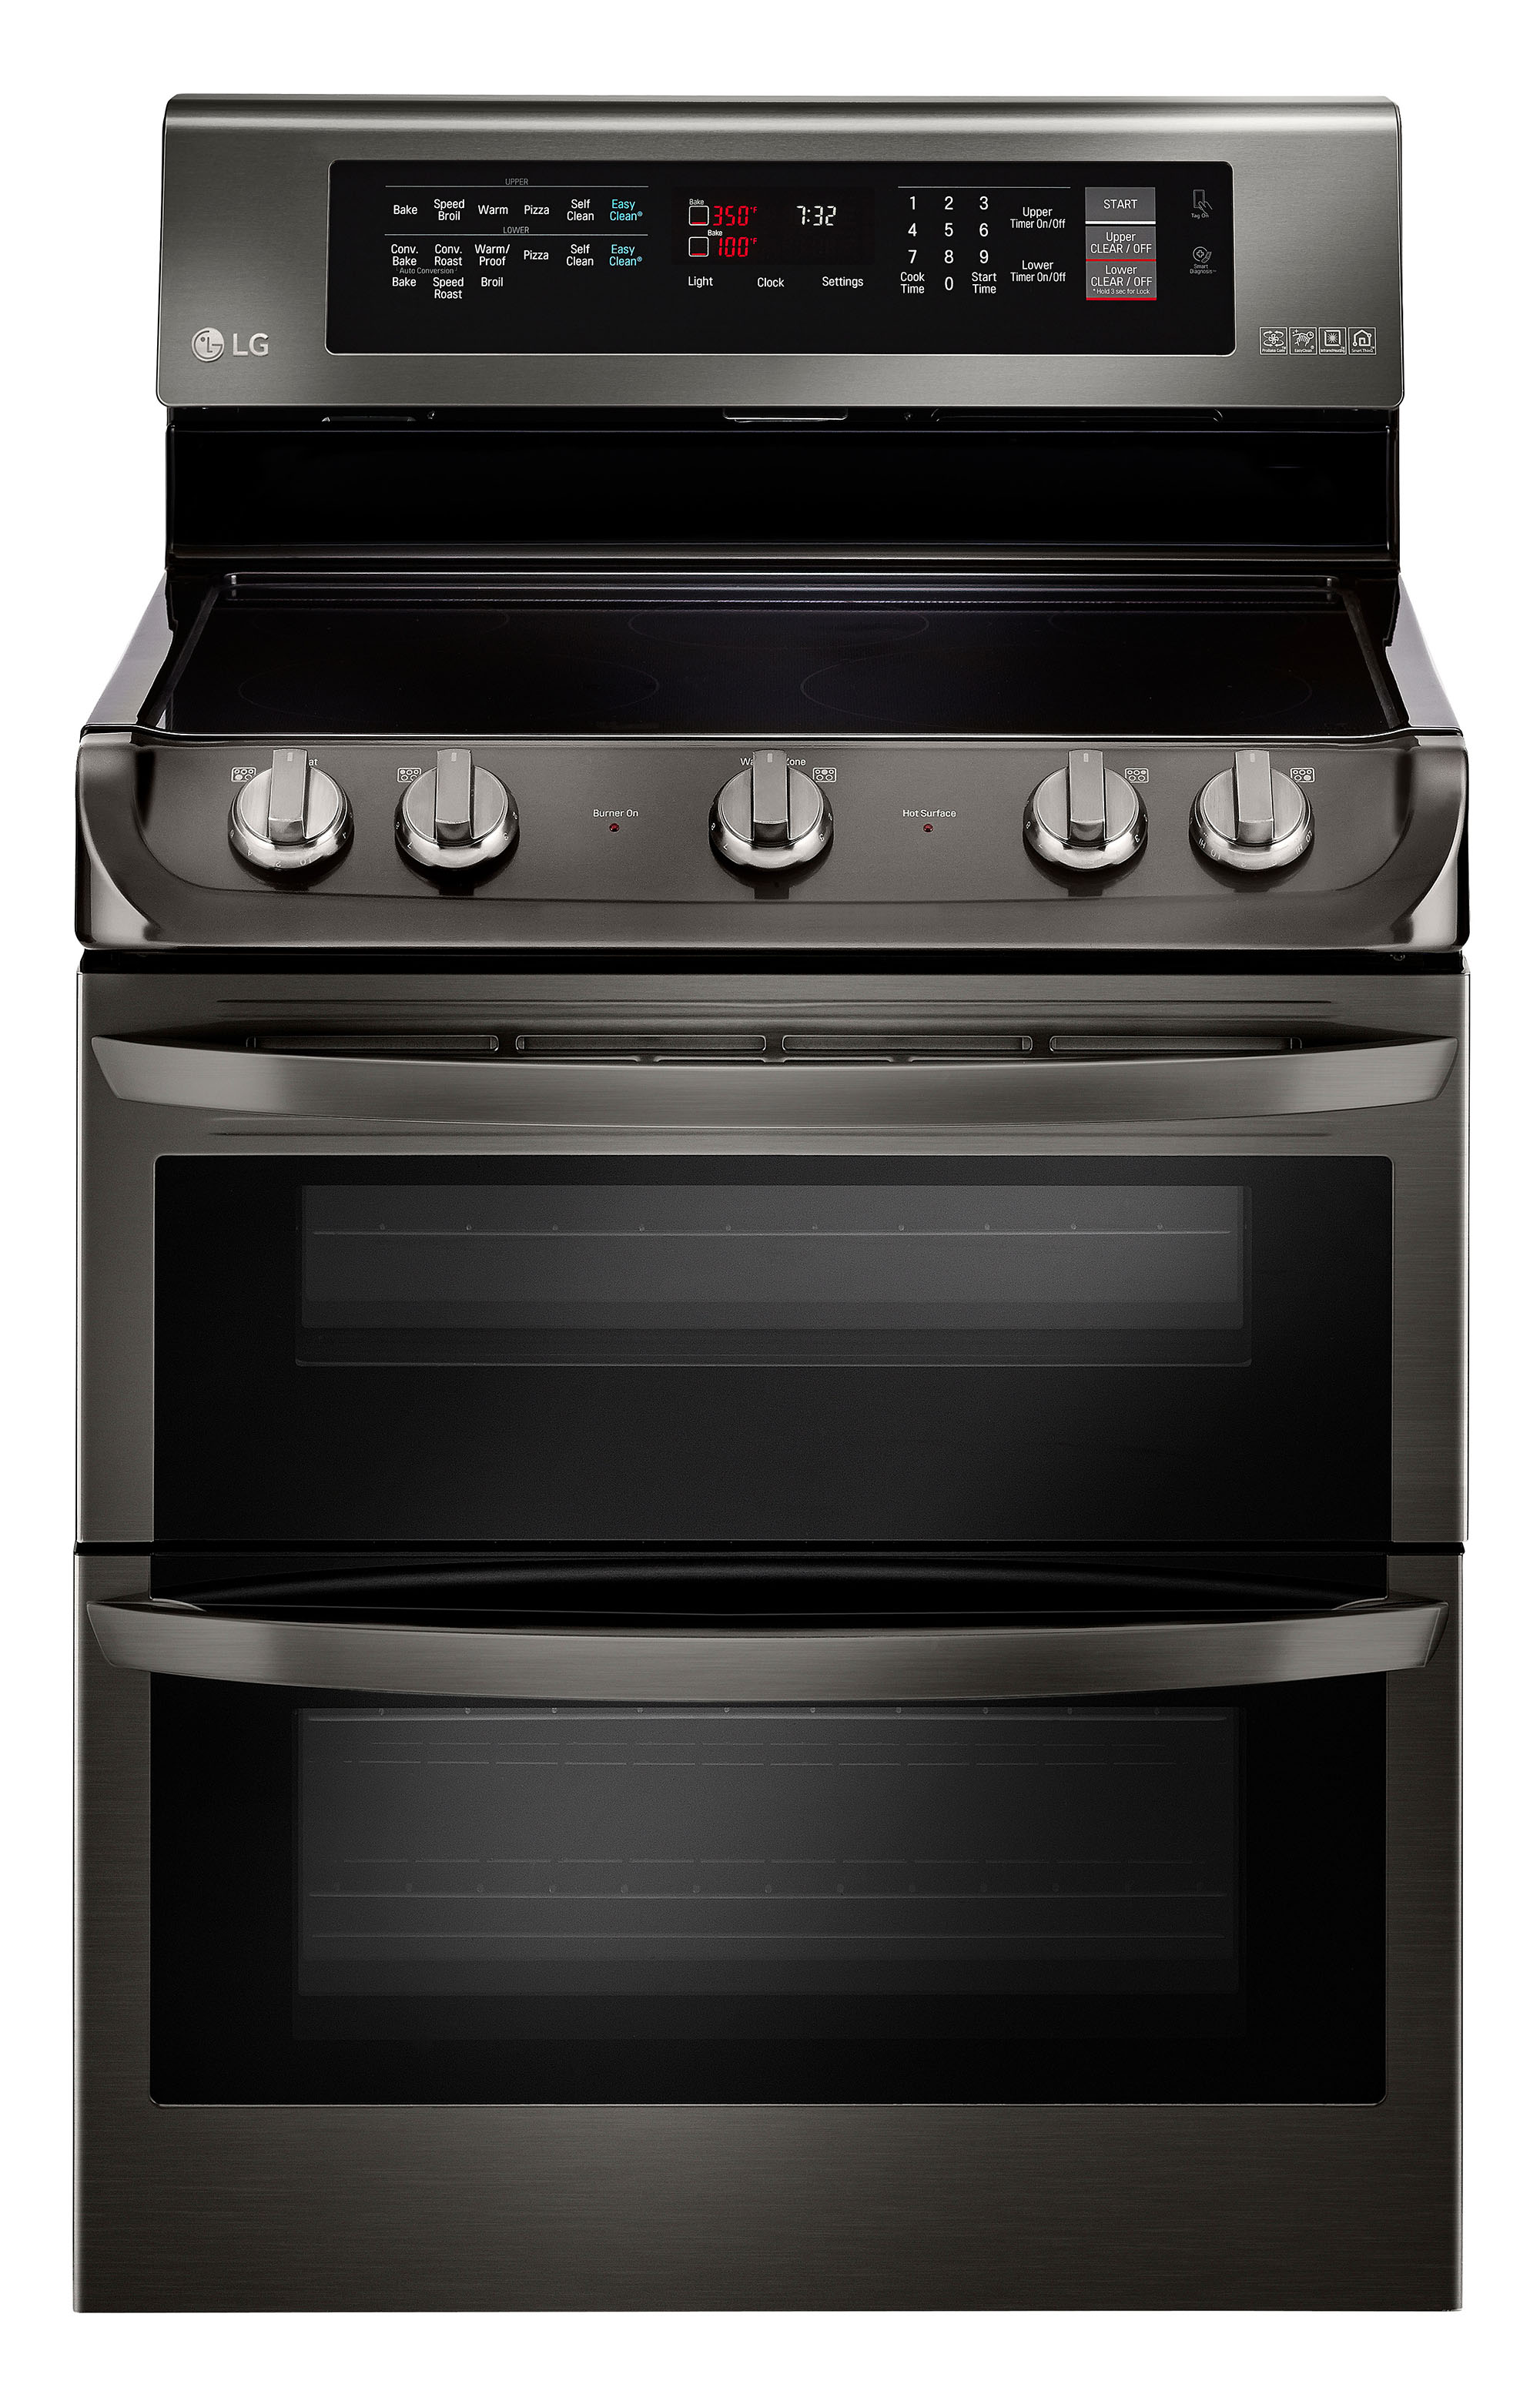 LG LDE4415BD 7.3 cu. ft. Double Oven Electric Range w/ProBake Black Stainless Steel Double Oven Electric Range